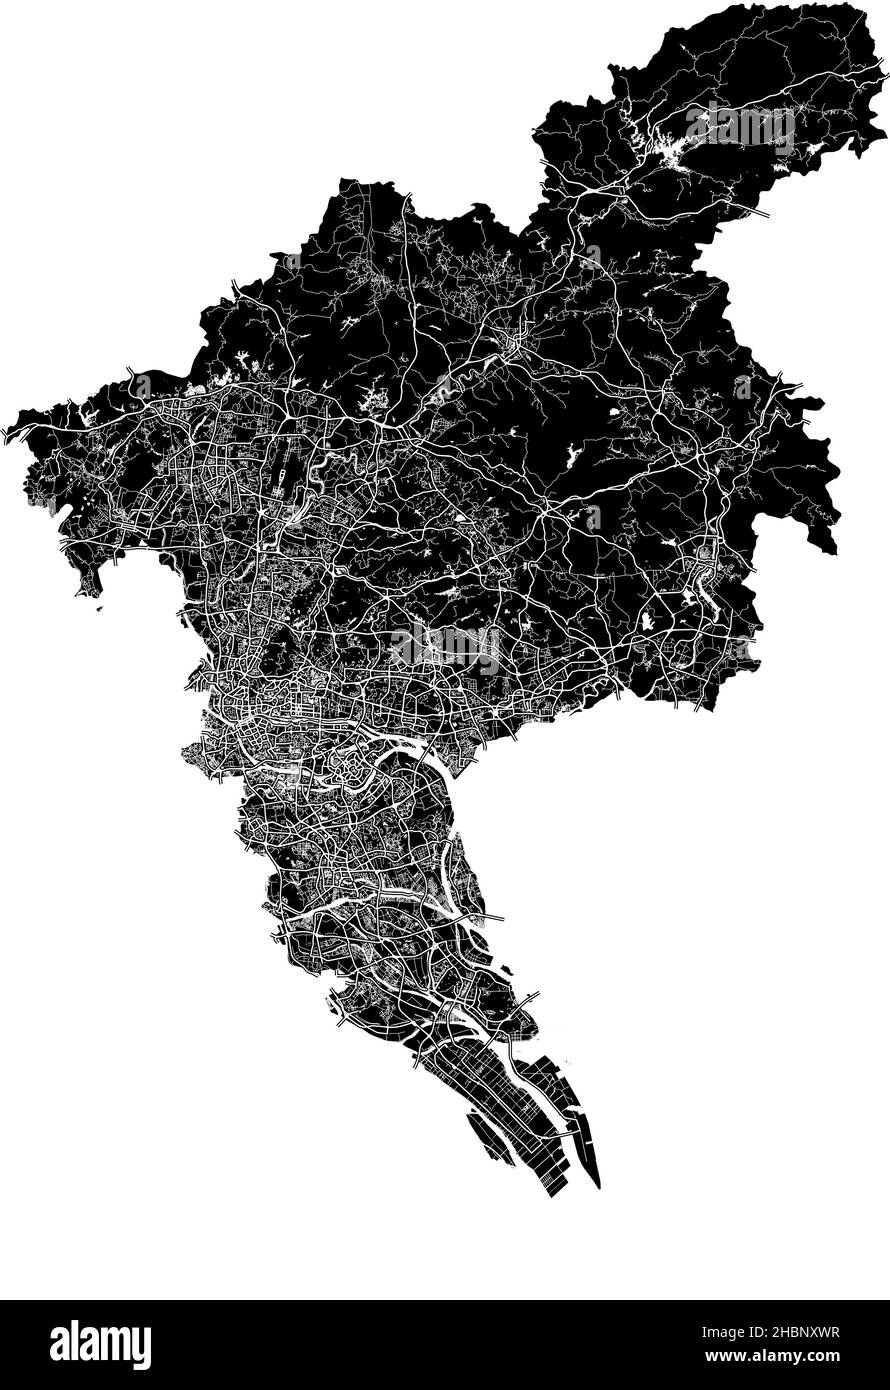 Guangzhou, China, high resolution vector map with city boundaries, and editable paths. The city map was drawn with white areas and lines for main road Stock Vector